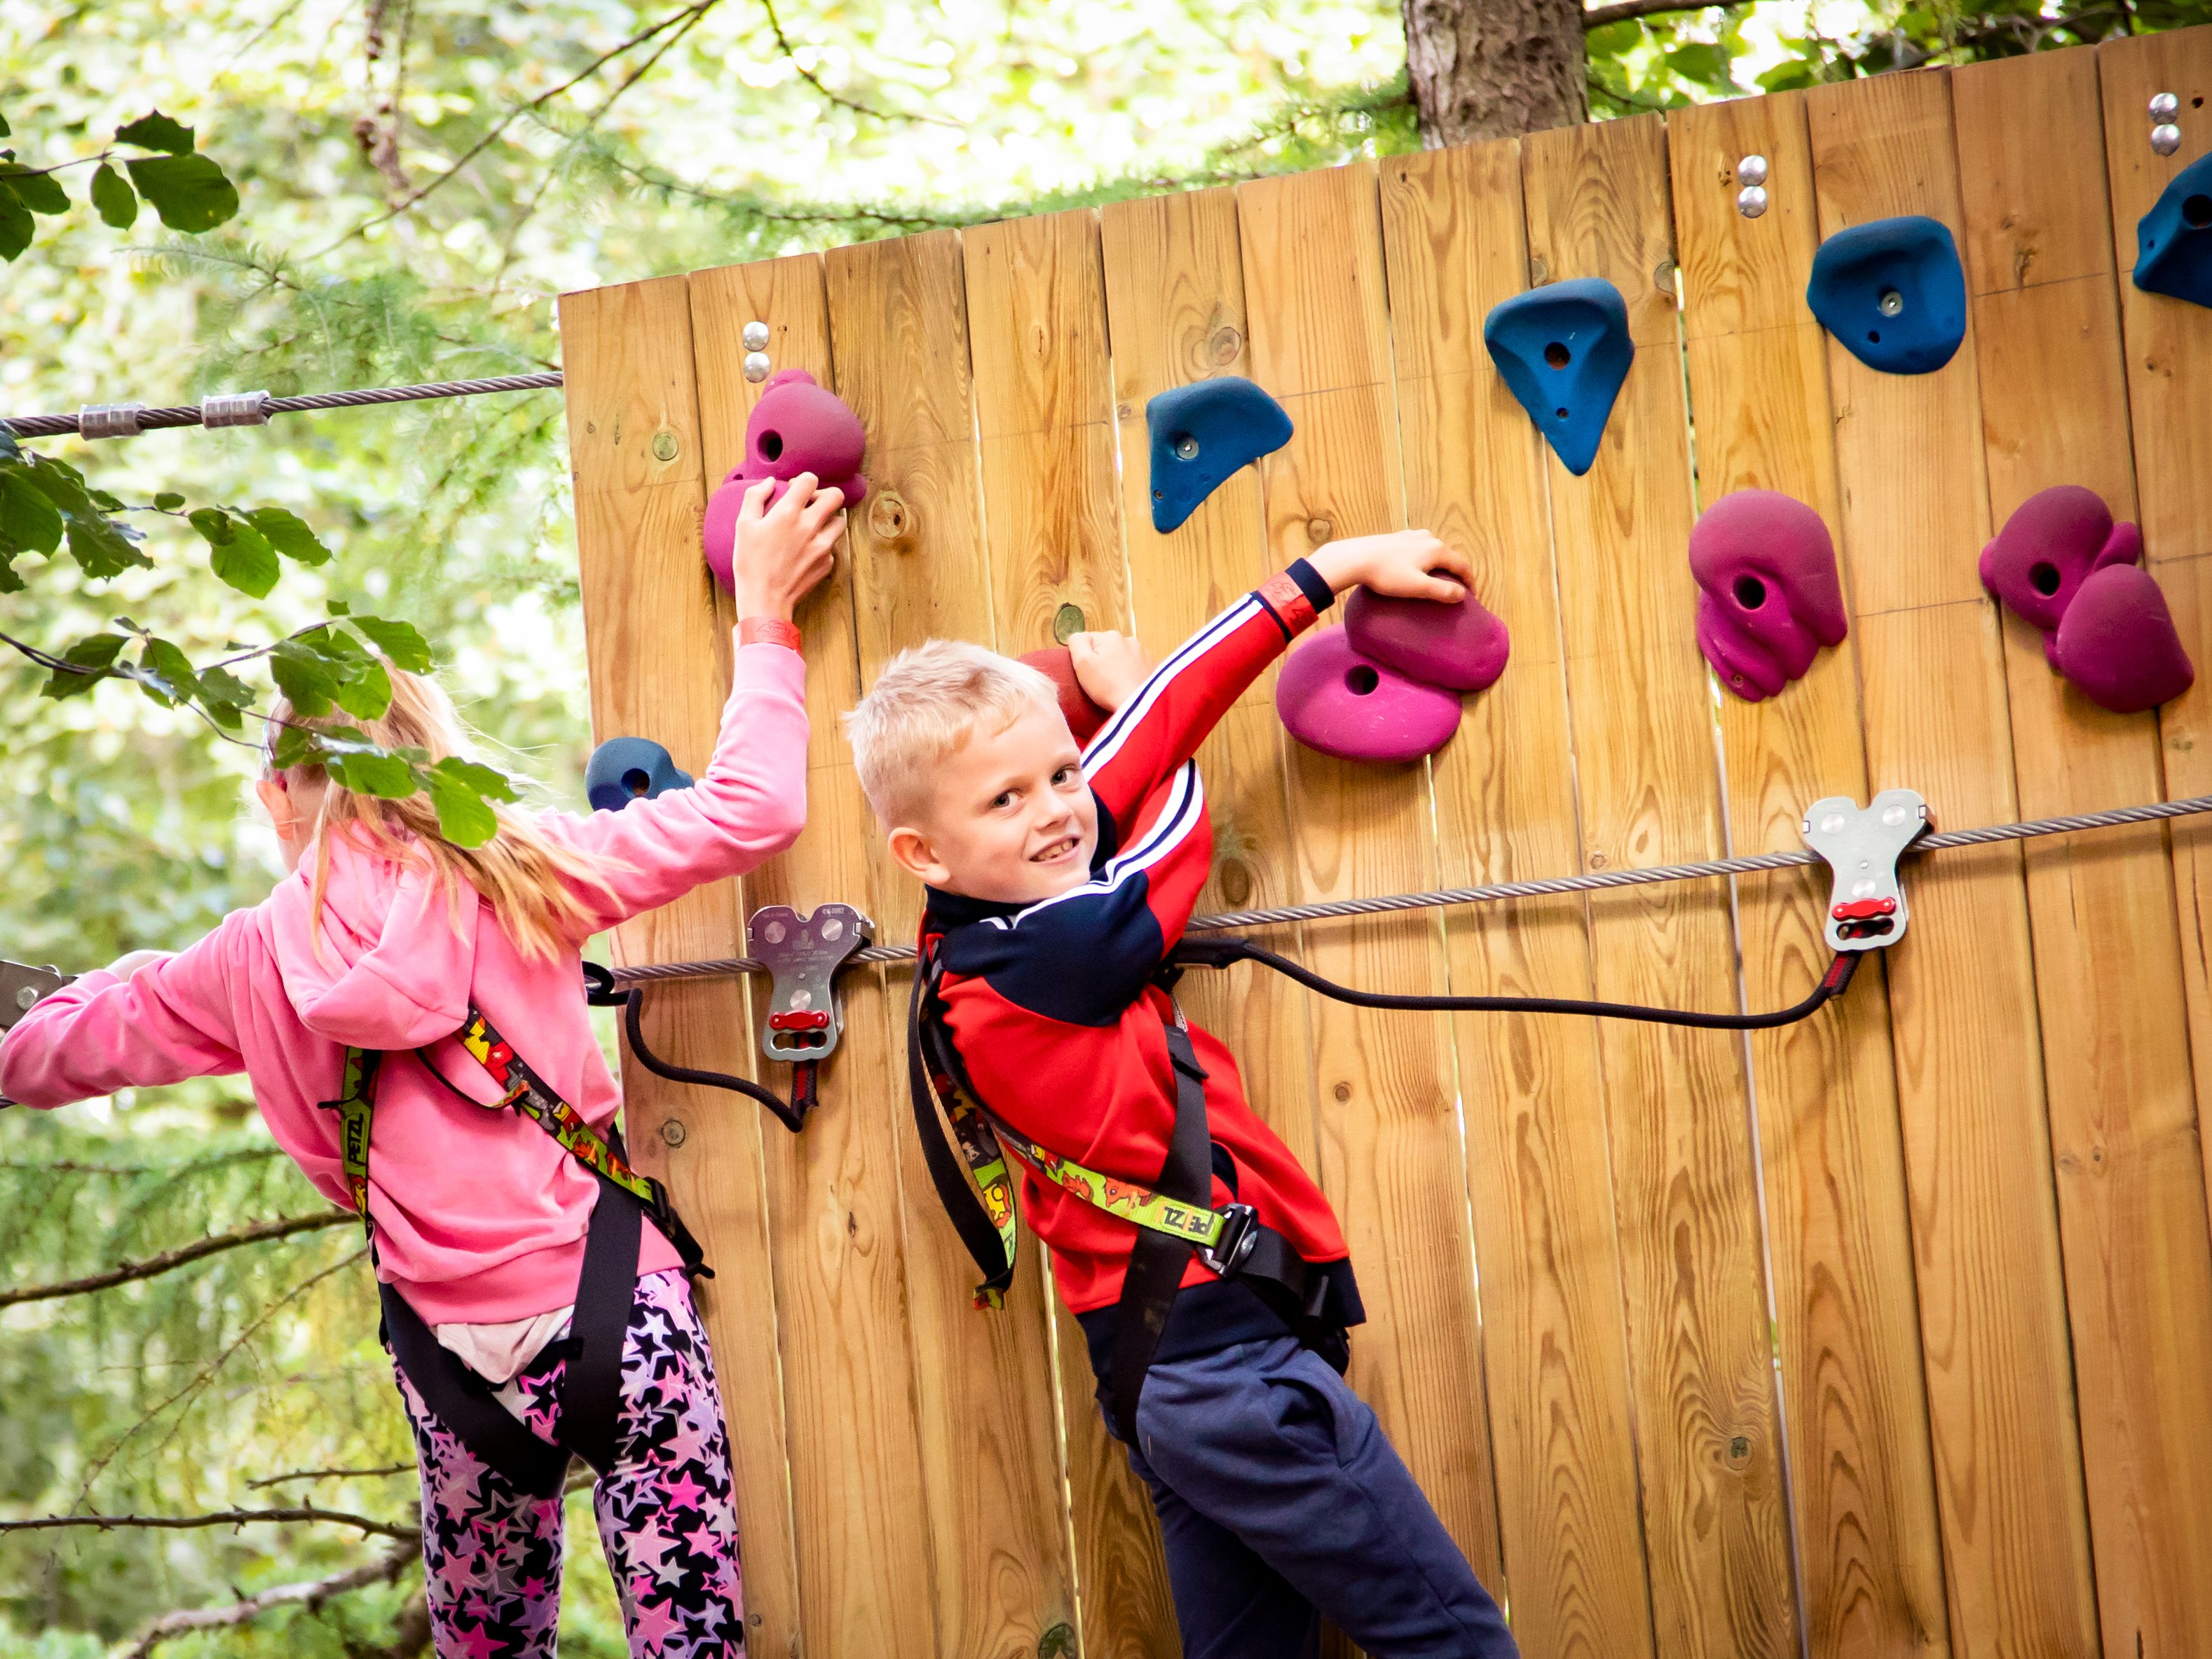 High Ropes For Kids In Temple Newsam Leeds Go Ape